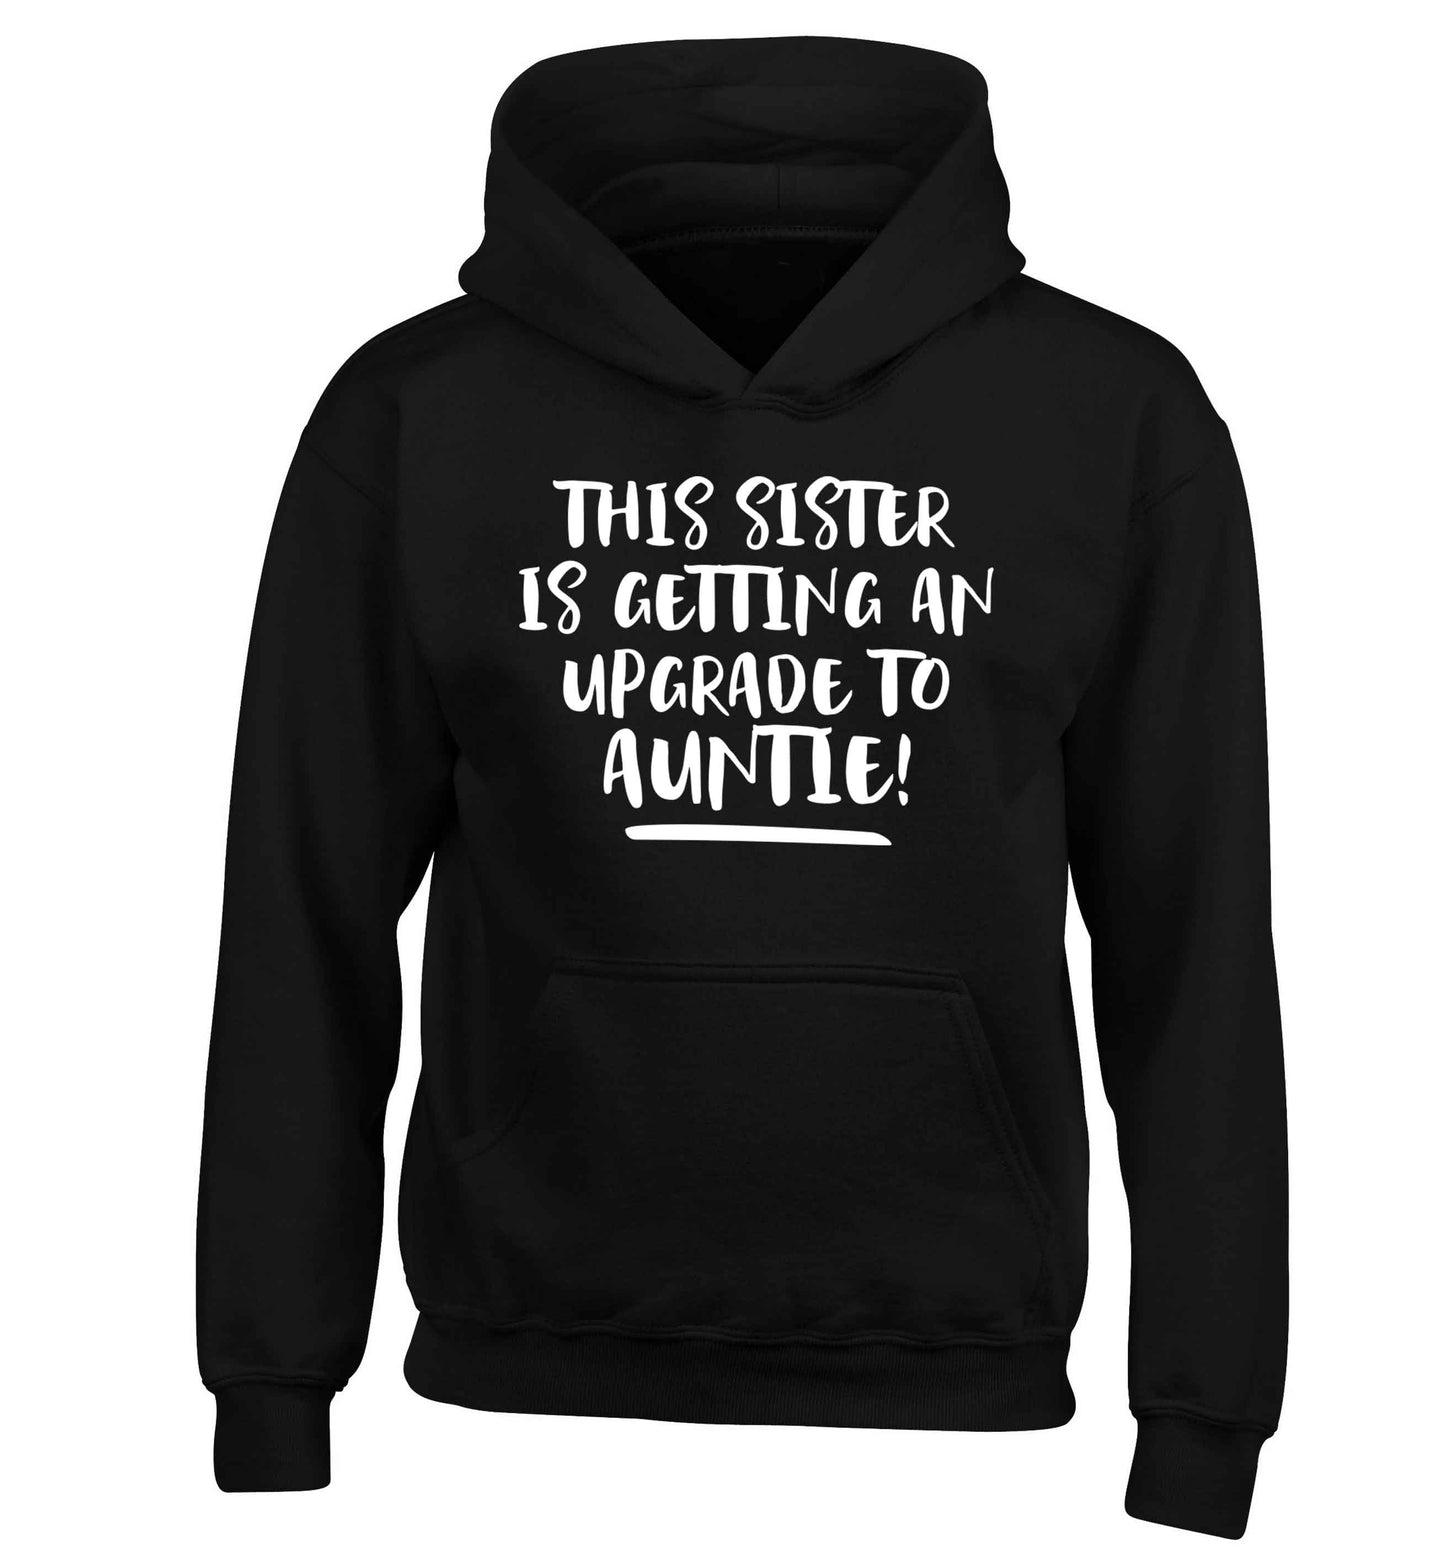 This sister is getting an upgrade to auntie! children's black hoodie 12-13 Years